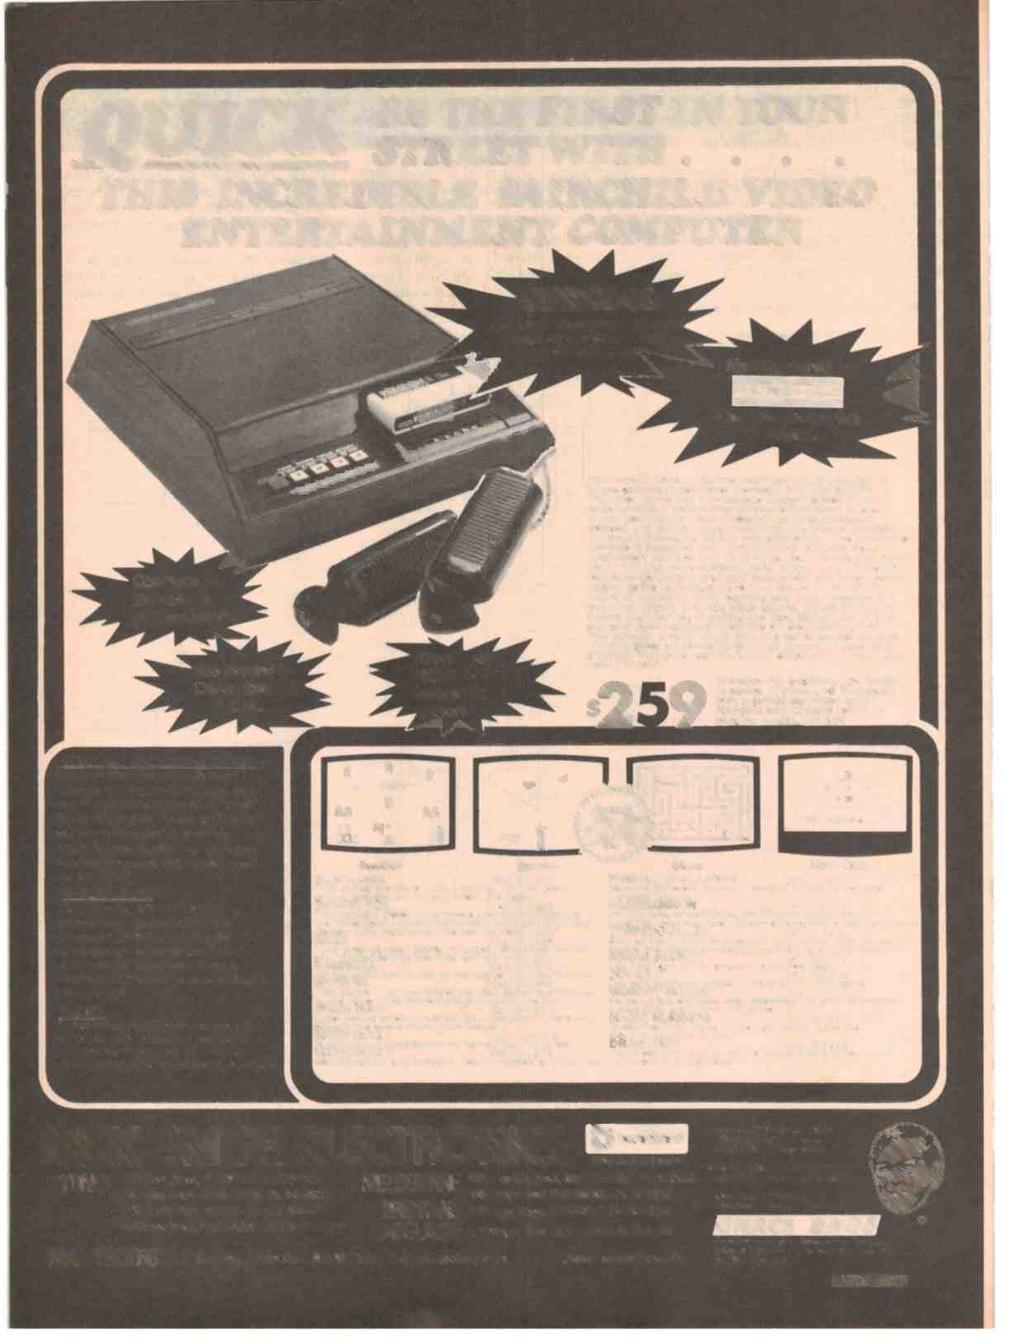 Q K BE THE FIRST IN YOUR STREET WITH. THIS INCREDIBLE FAIRCHILD VIDEO ENTERTAINMENT COMPUTER r SPECIAL Includes a NOUGHTS and CROSSES cartridge valued at 524.